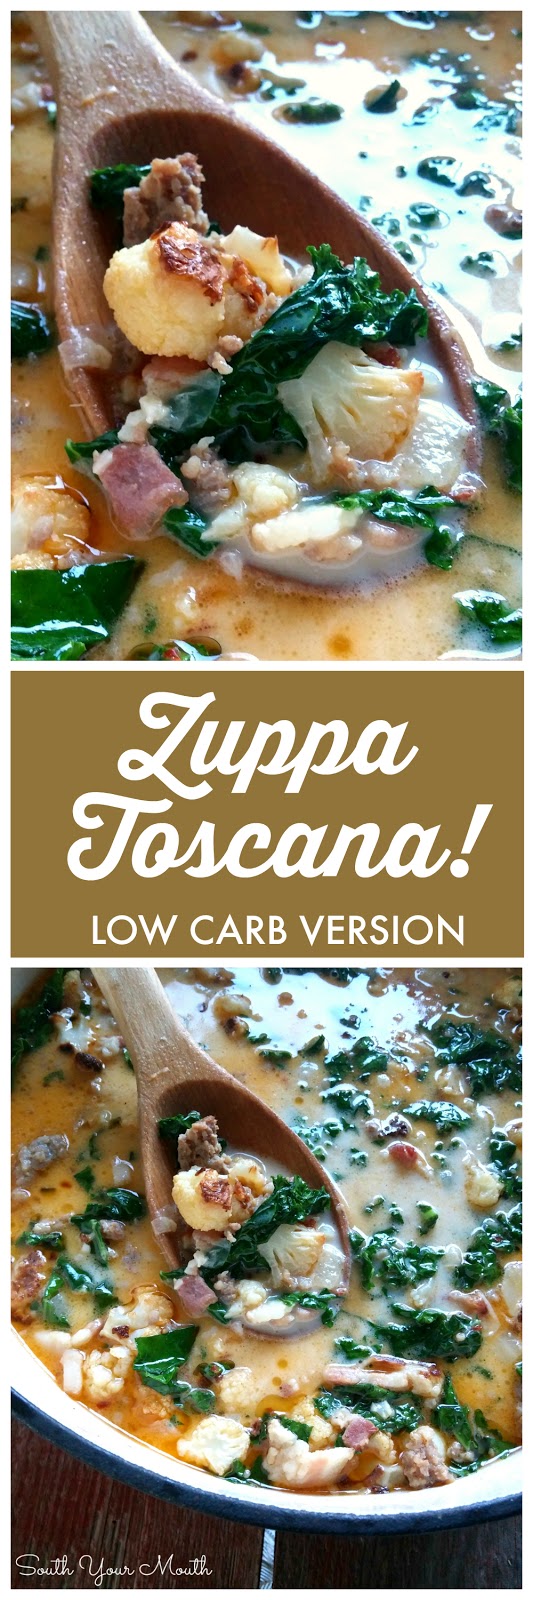 Low Carb Zuppa Toscana! Made with roasted cauliflower instead of potatoes. This soup has ALL the flavor of the Olive Garden hit recipe! Post also includes the traditional recipe with potatoes.